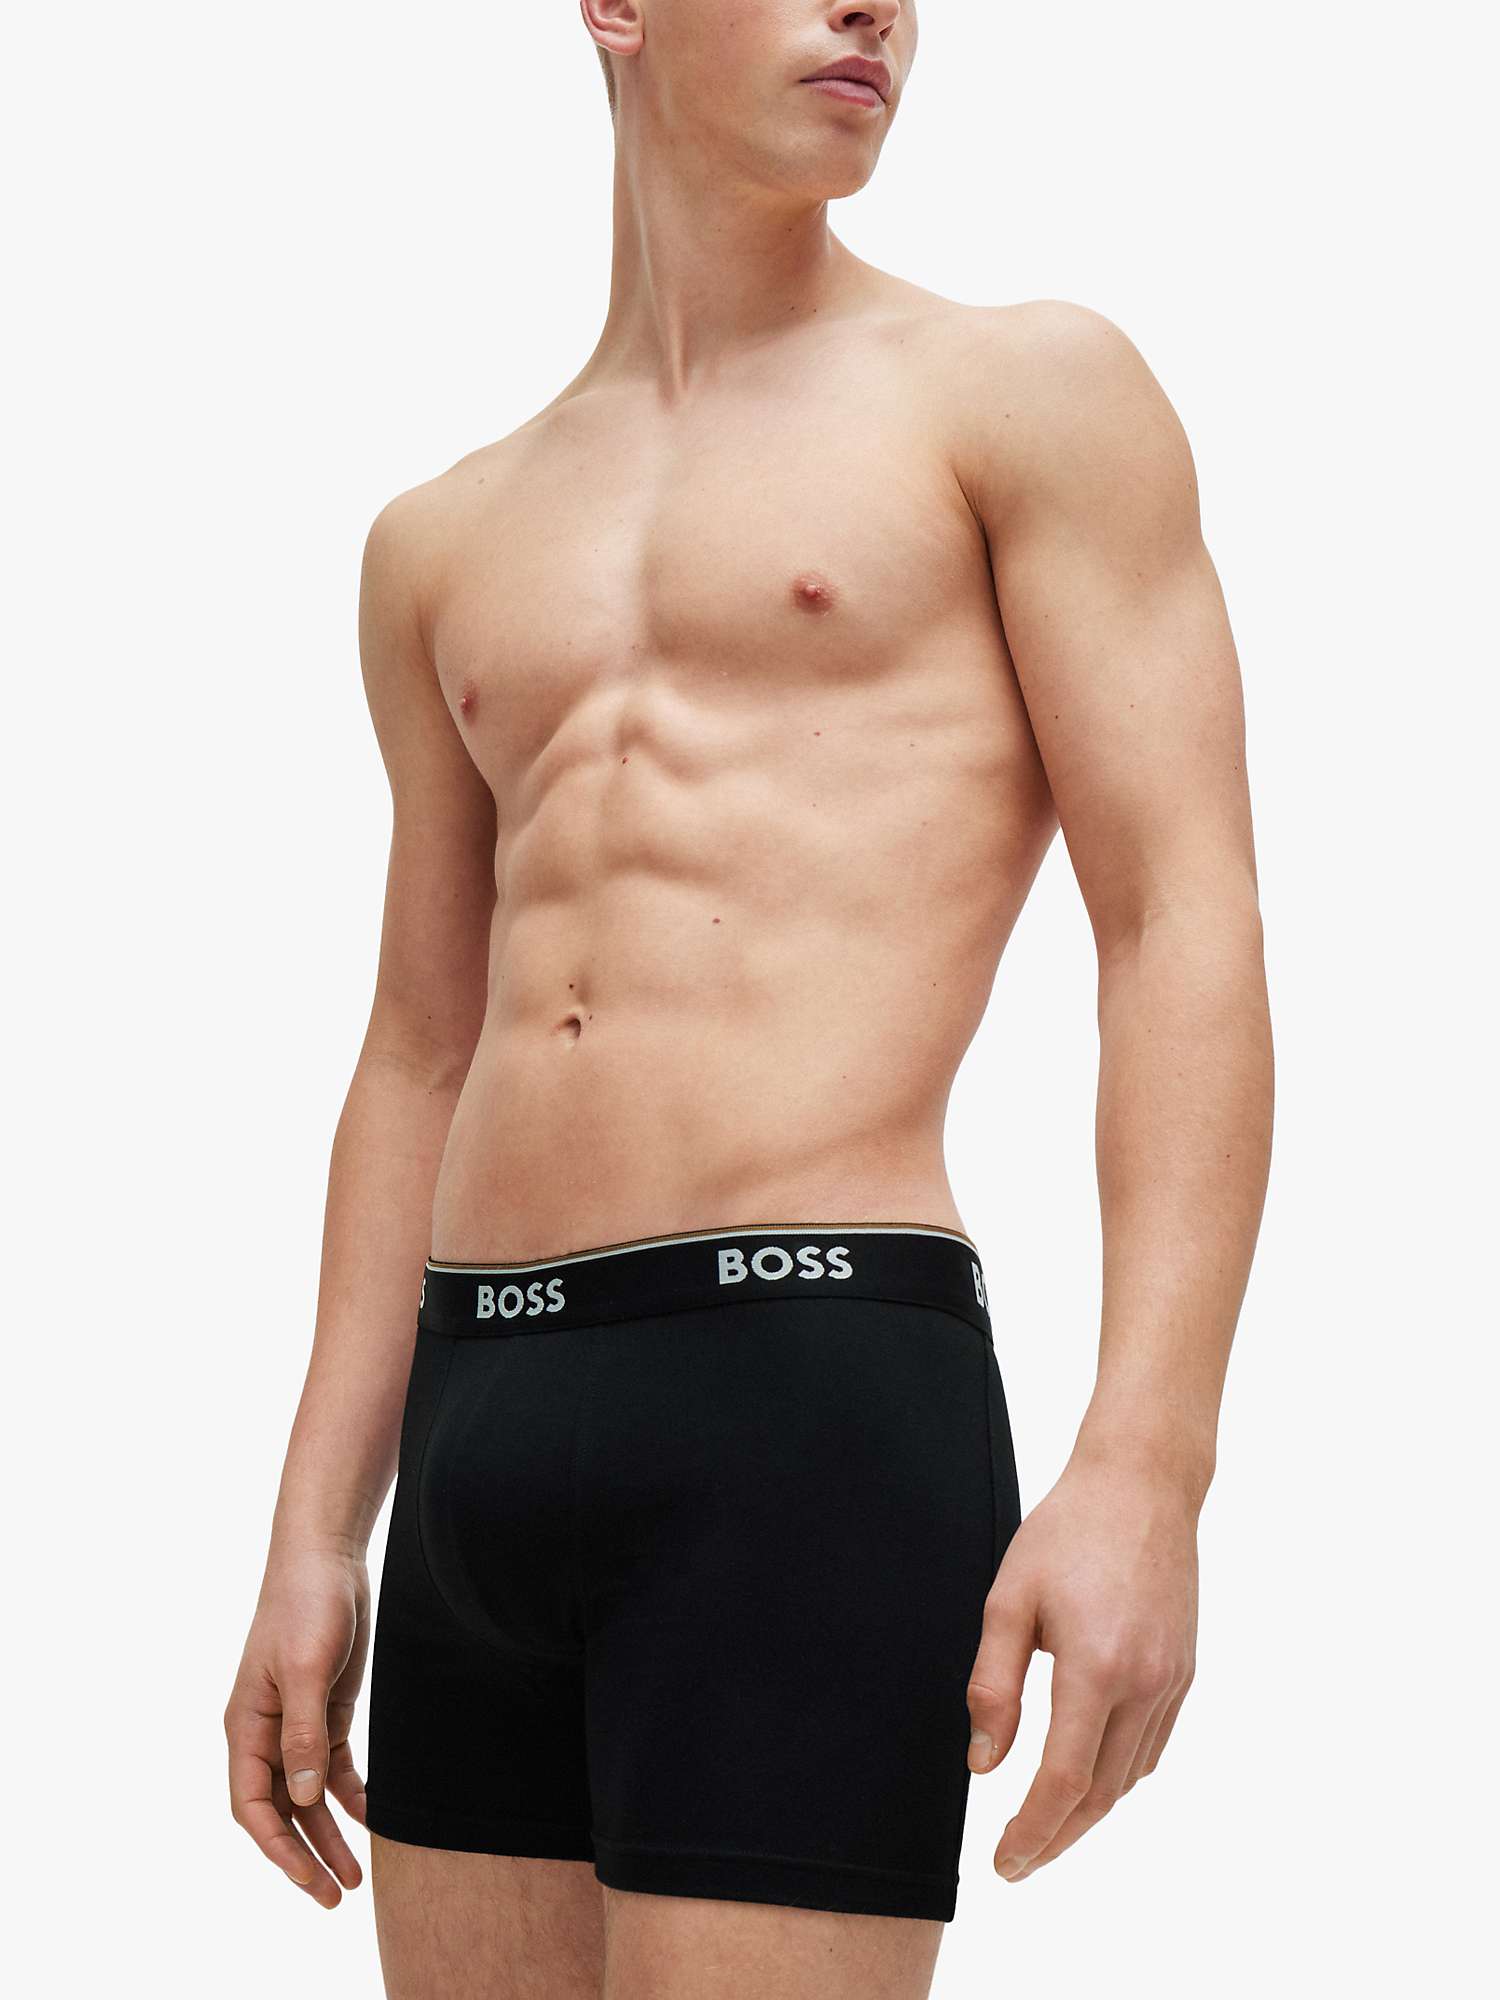 Buy BOSS Logo Waist Cotton Stretch Boxer Shorts, Pack of 3, Beige/Multi Online at johnlewis.com